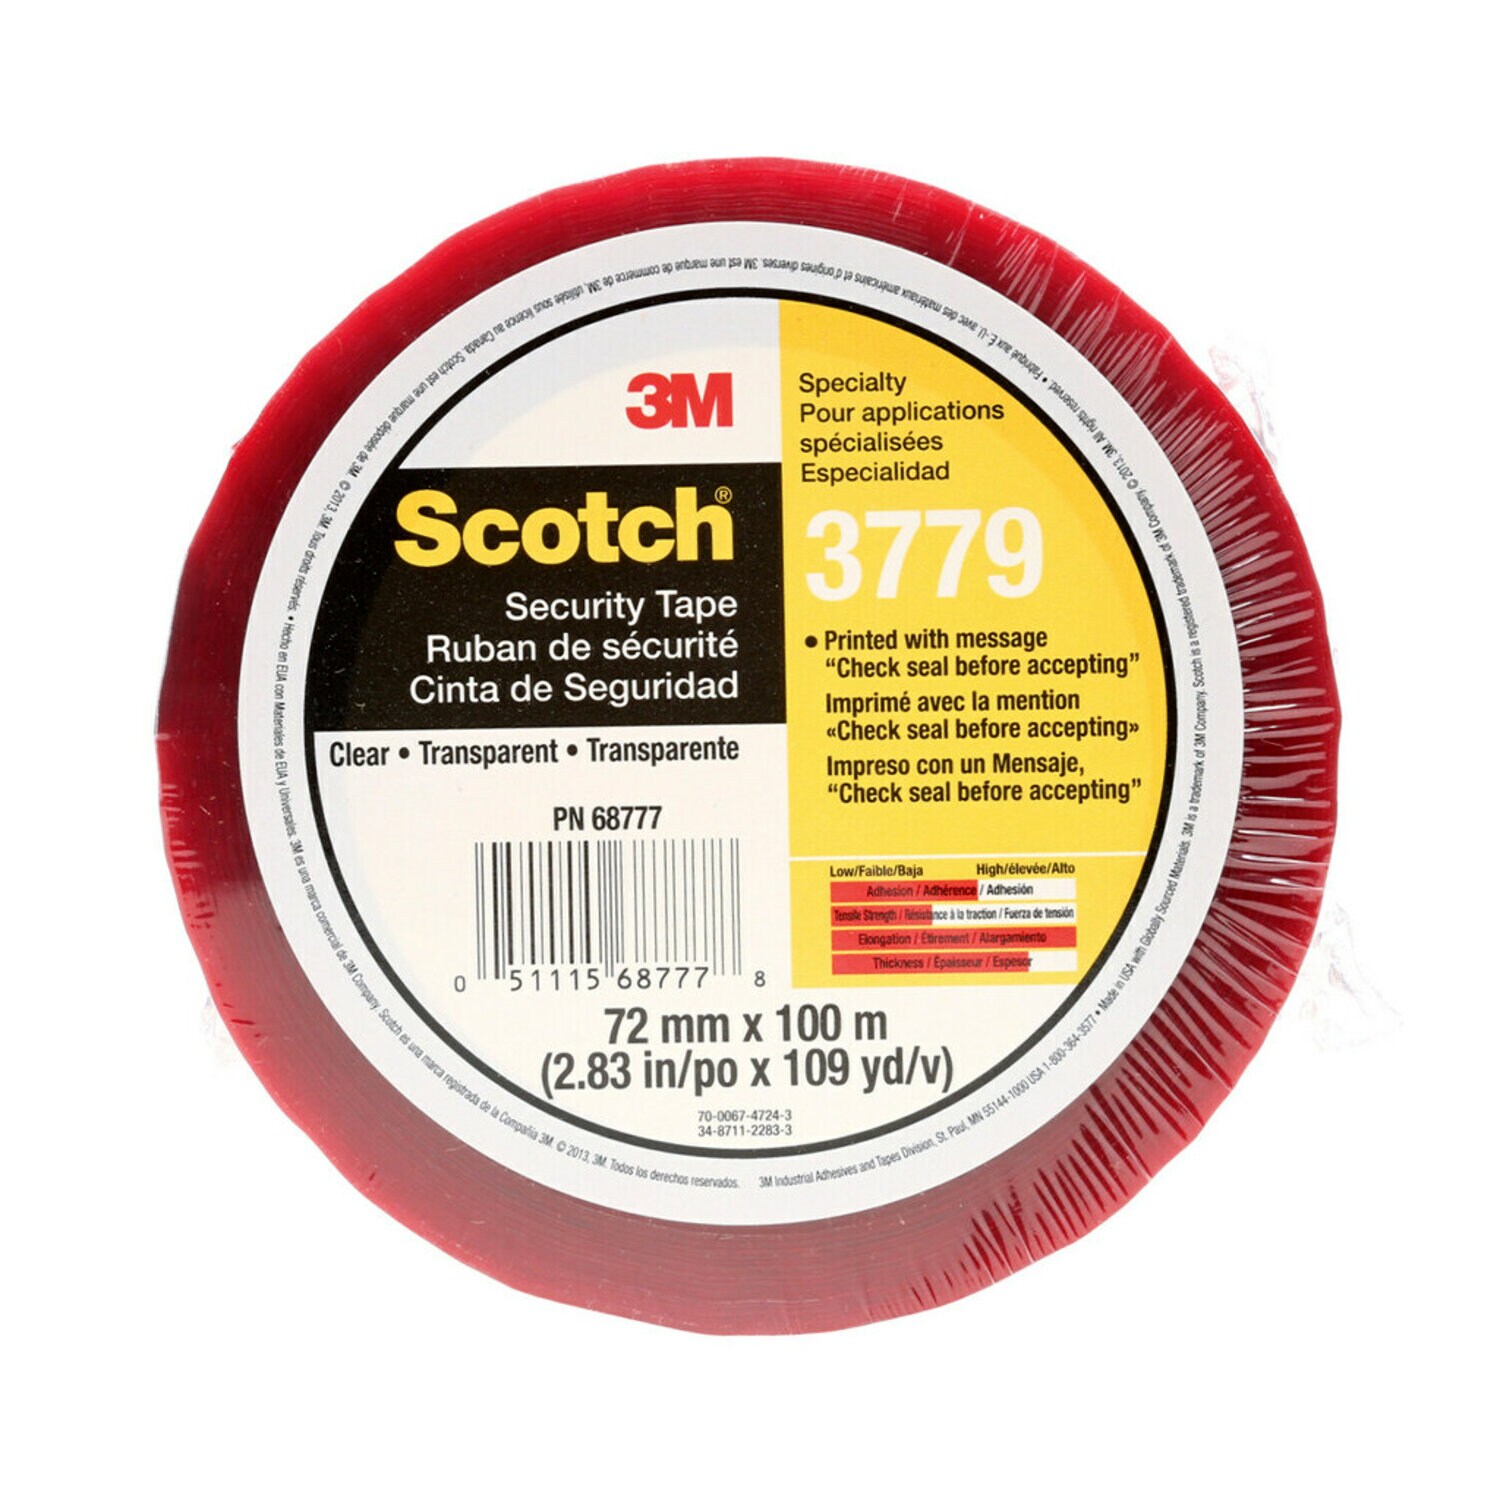 7010335124 - Scotch Security Message Box Sealing Tape 3779, Clear, 72 mm x 100 m,
24/Case, Individually Wrapped Conveniently Packaged